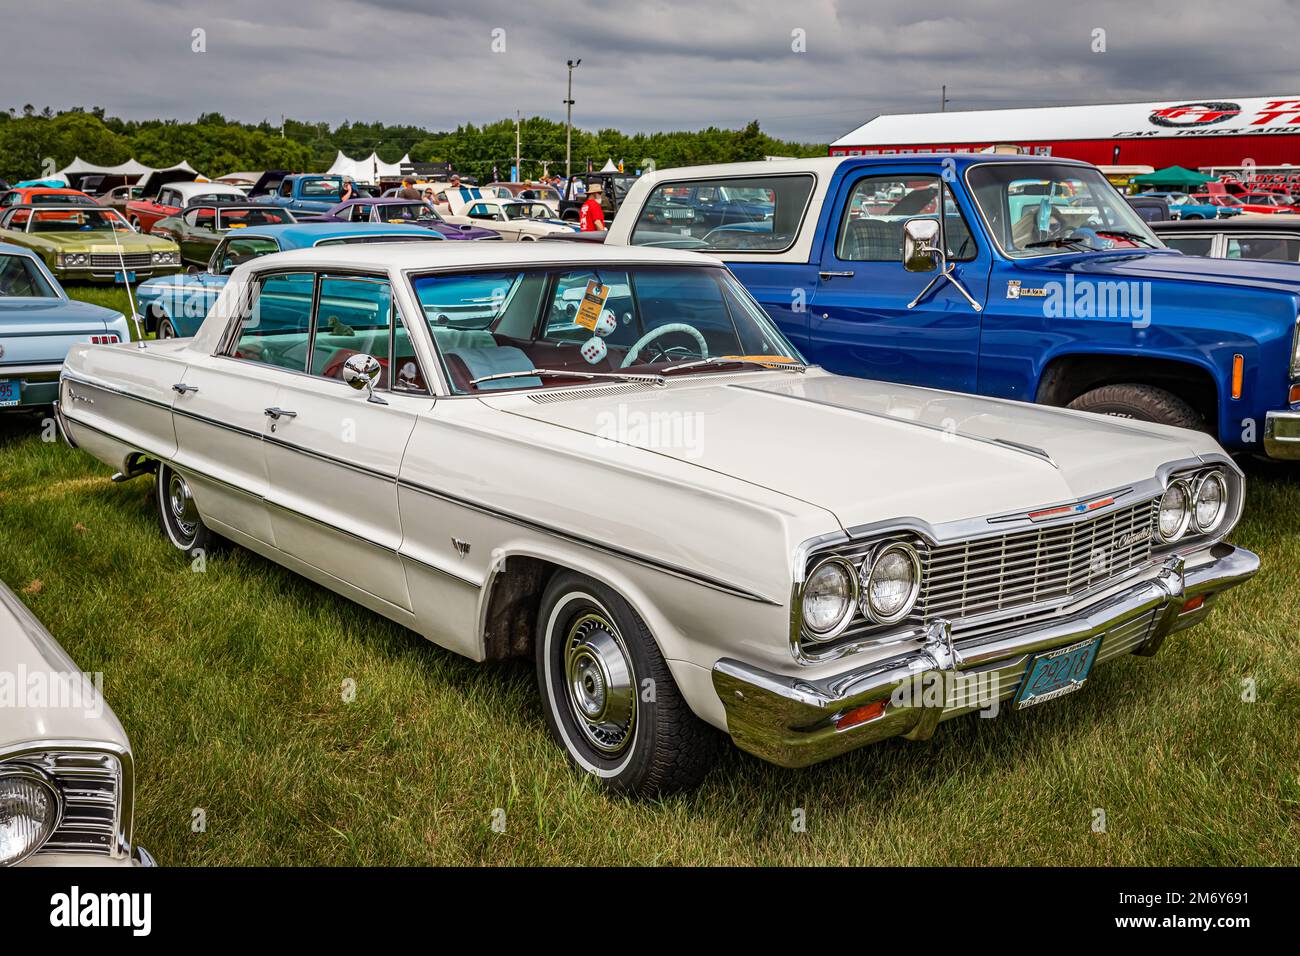 Iola, WI - July 07, 2022: High perspective front corner view of a 1964 Chevrolet Impala 4 Door Sedan at a local car show. Stock Photo